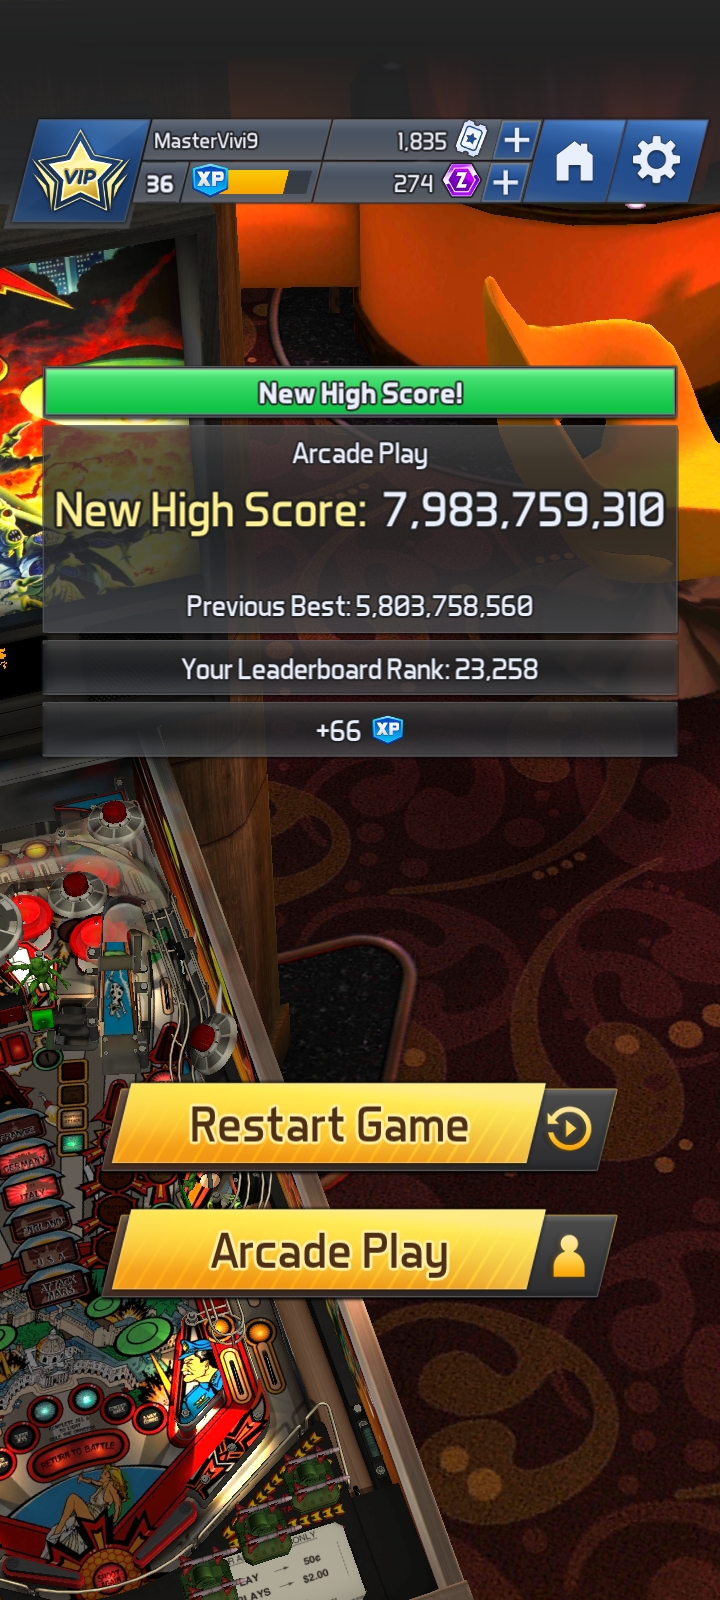 Hauntedprogram: Williams Pinball: Attack From Mars [Arcade Play] (Android) 7,983,759,310 points on 2022-10-21 20:44:48